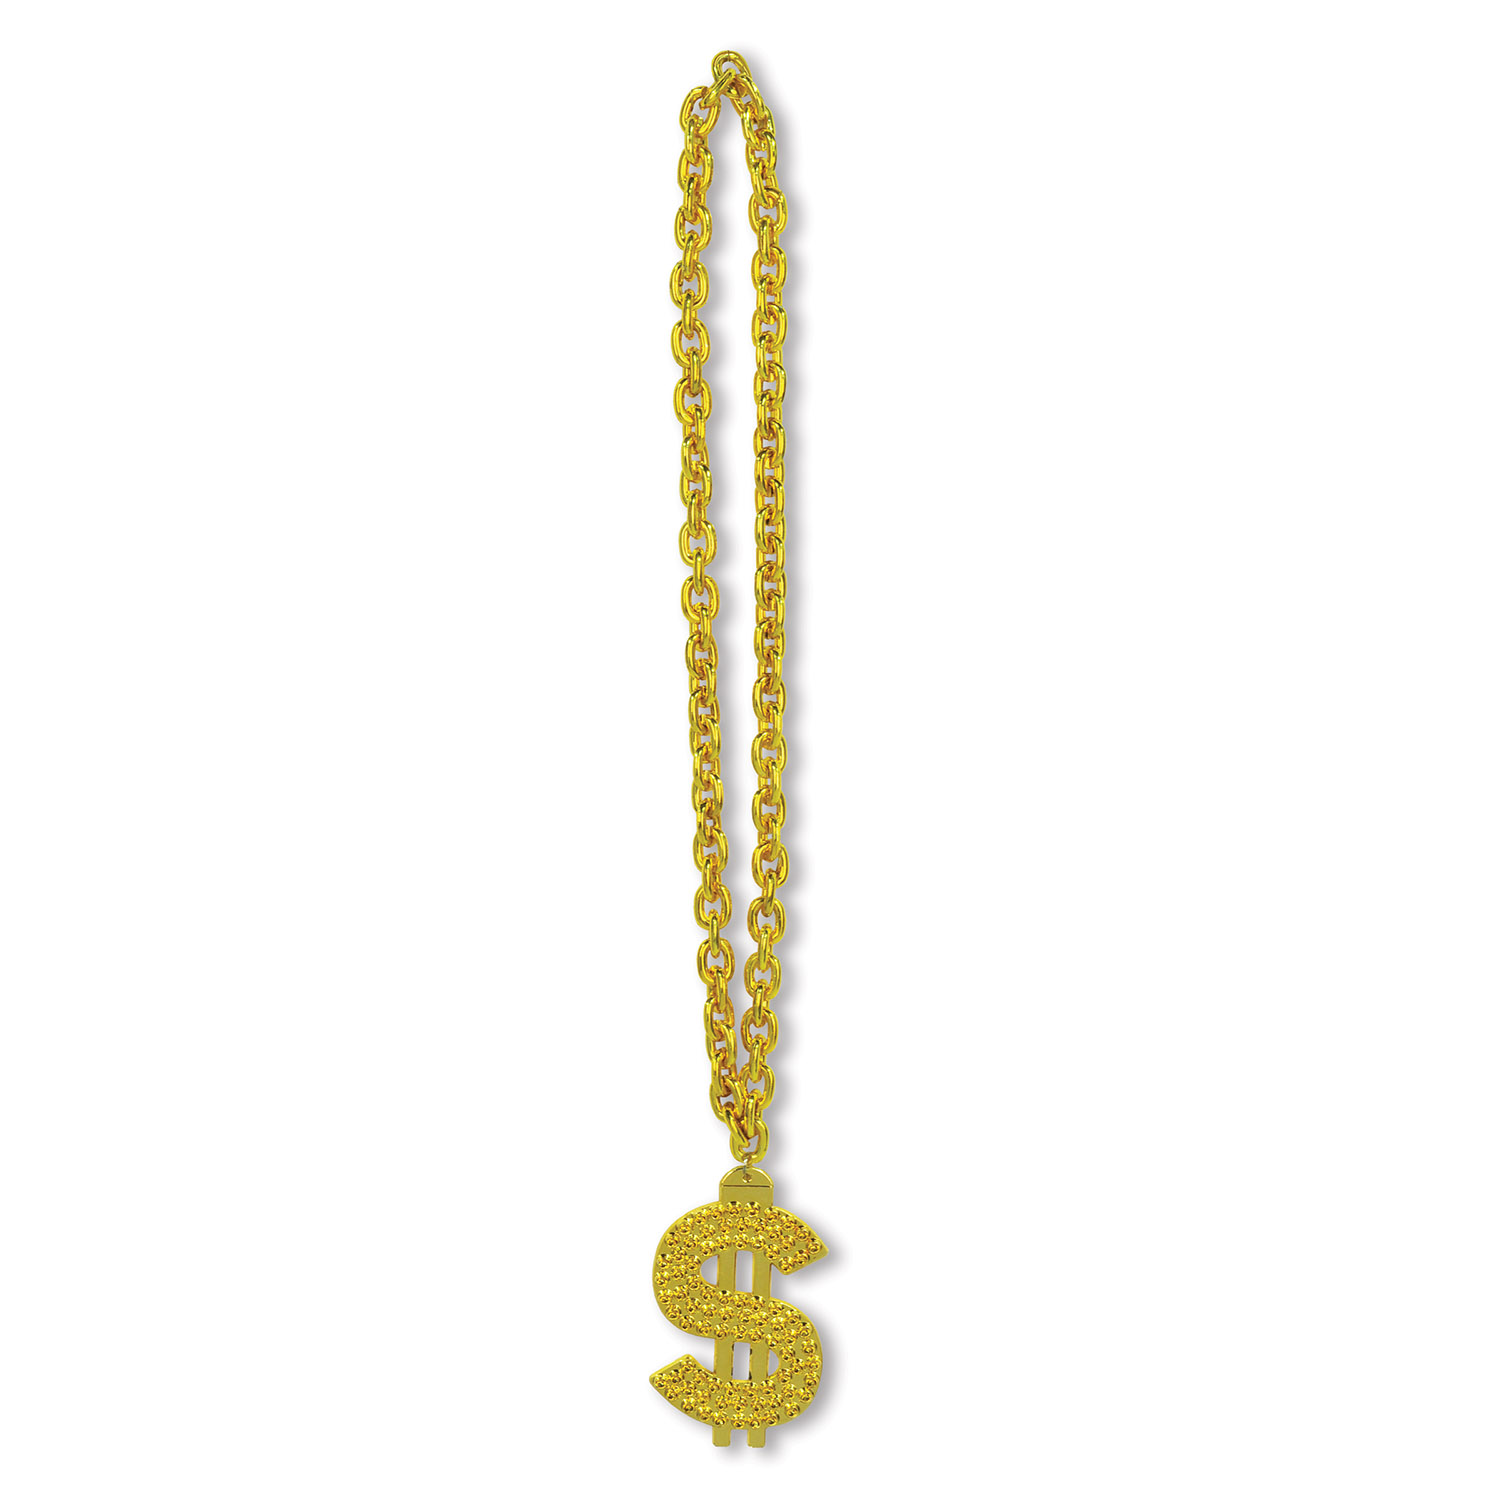 ''GOLD Chain Beads w/''''''''''''''''$'''''''''''''''' Medallion''''''''''